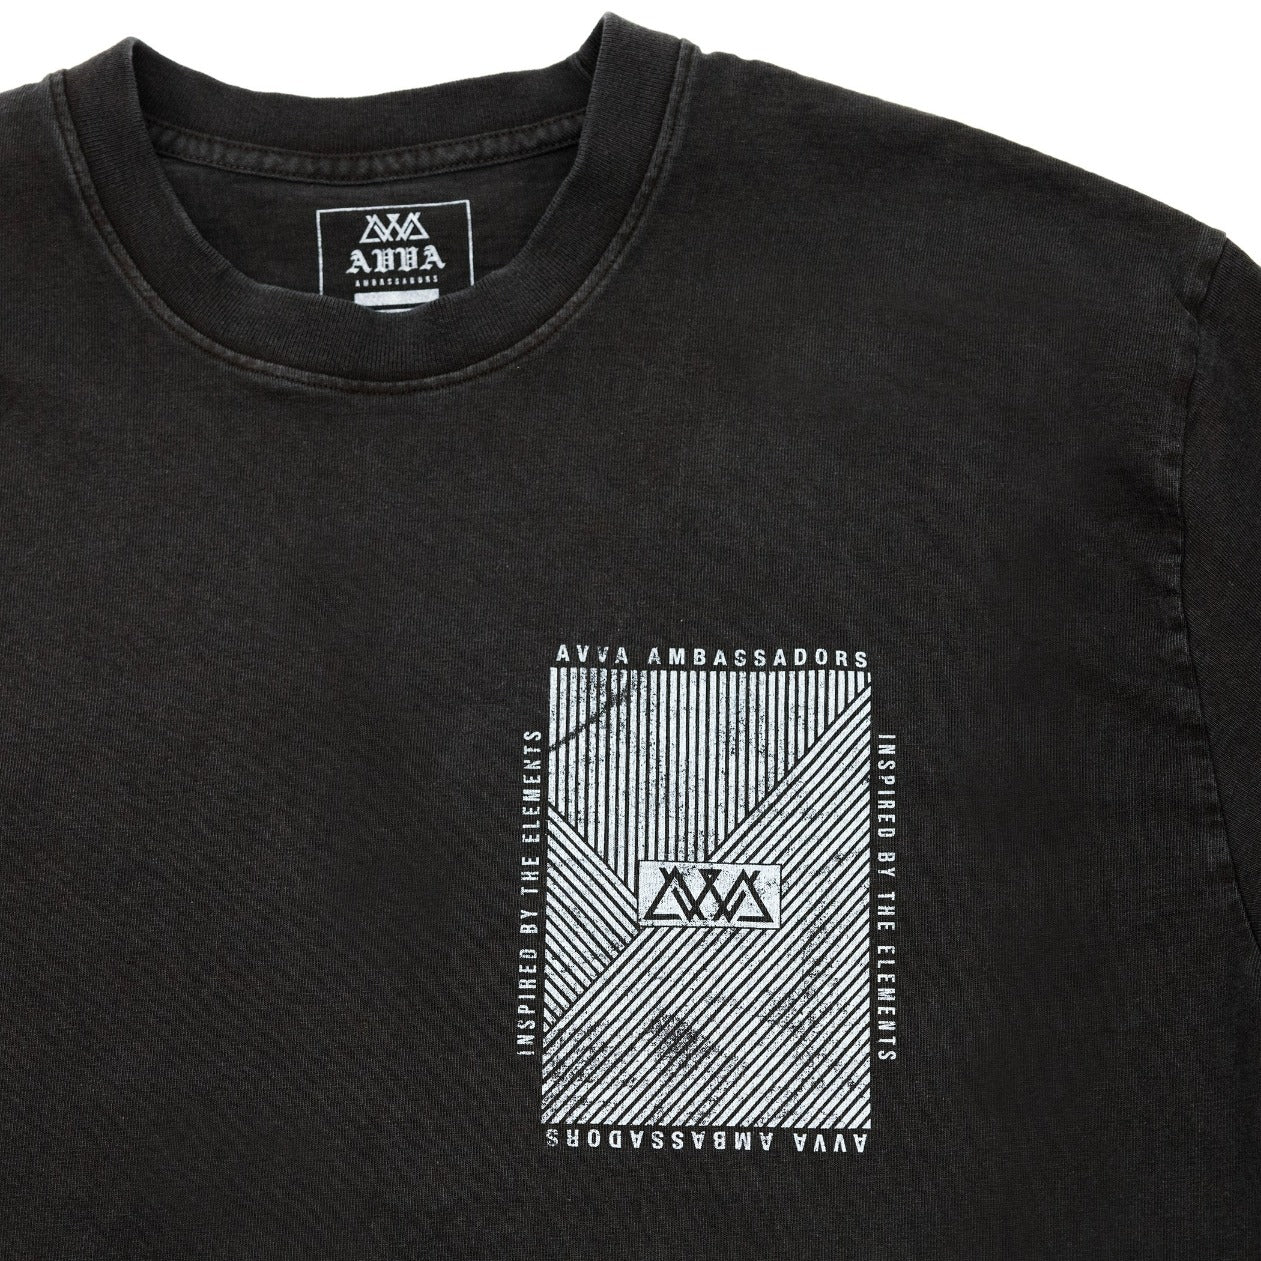 FRONT CLOSE UP VIEW OF HEAVYWEIGHT CLIMATE LONG SLEEVE. HIGHLIGHTING AVVA AMBASSADORS INSPIRED BY THE ELEMENTS LOGO IN TOP RIGHT.